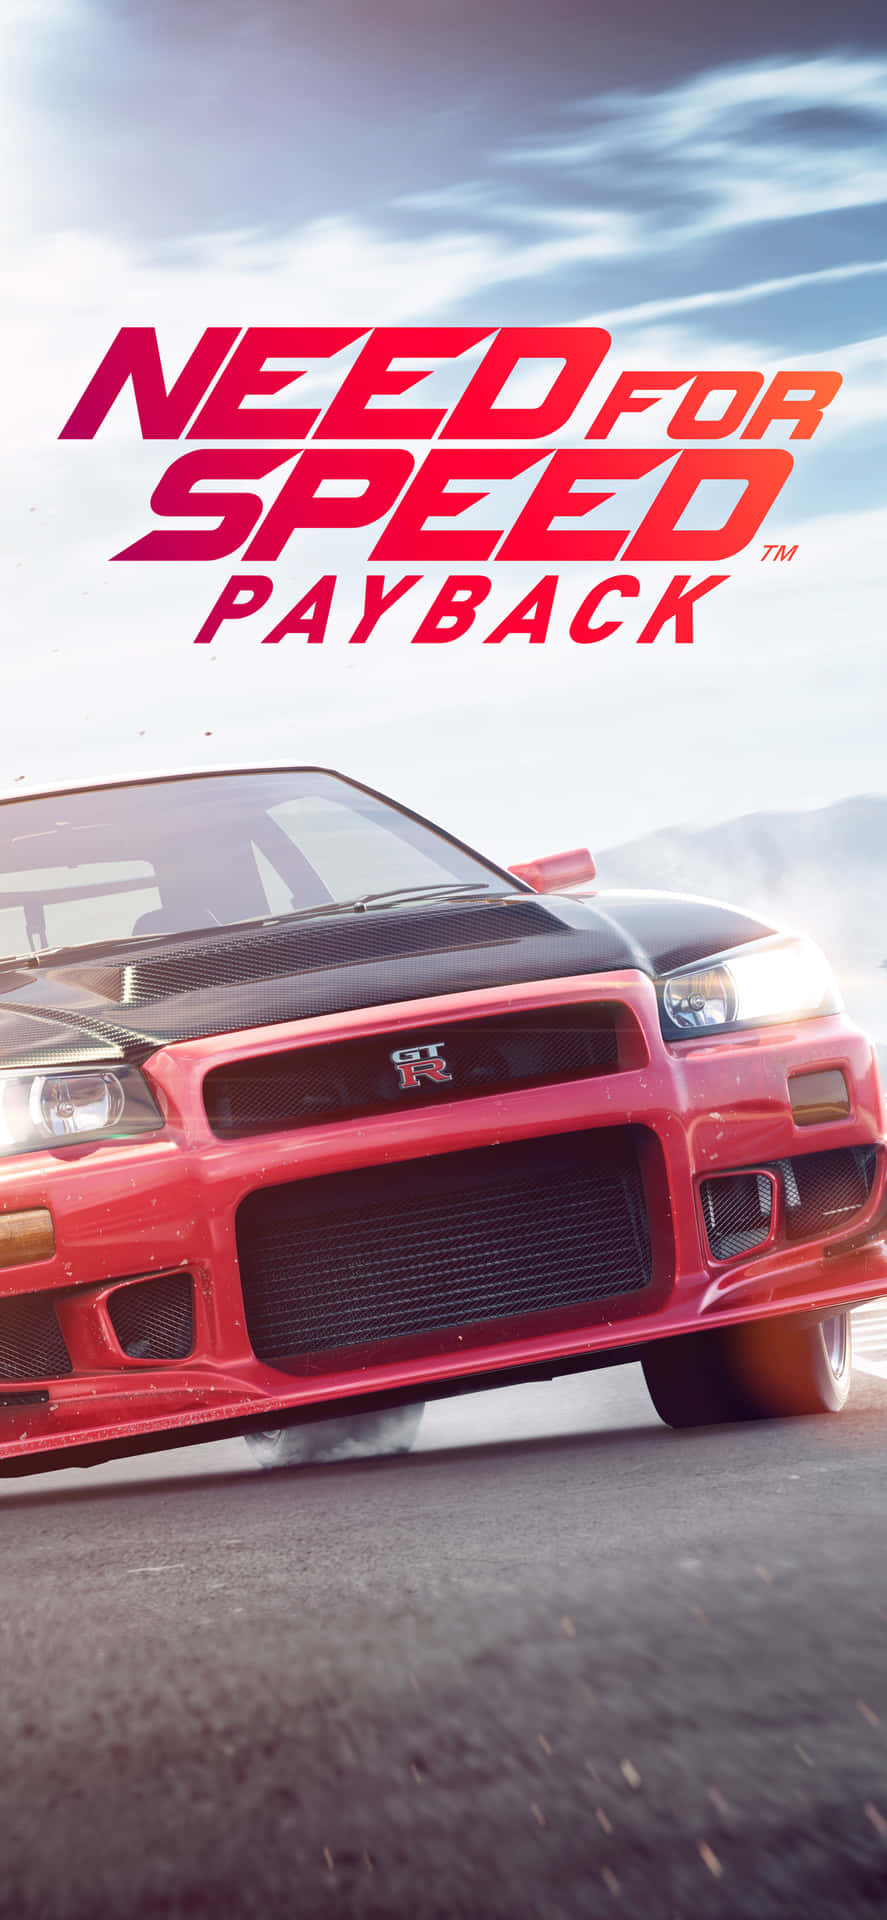 Need For Speed Payback Background